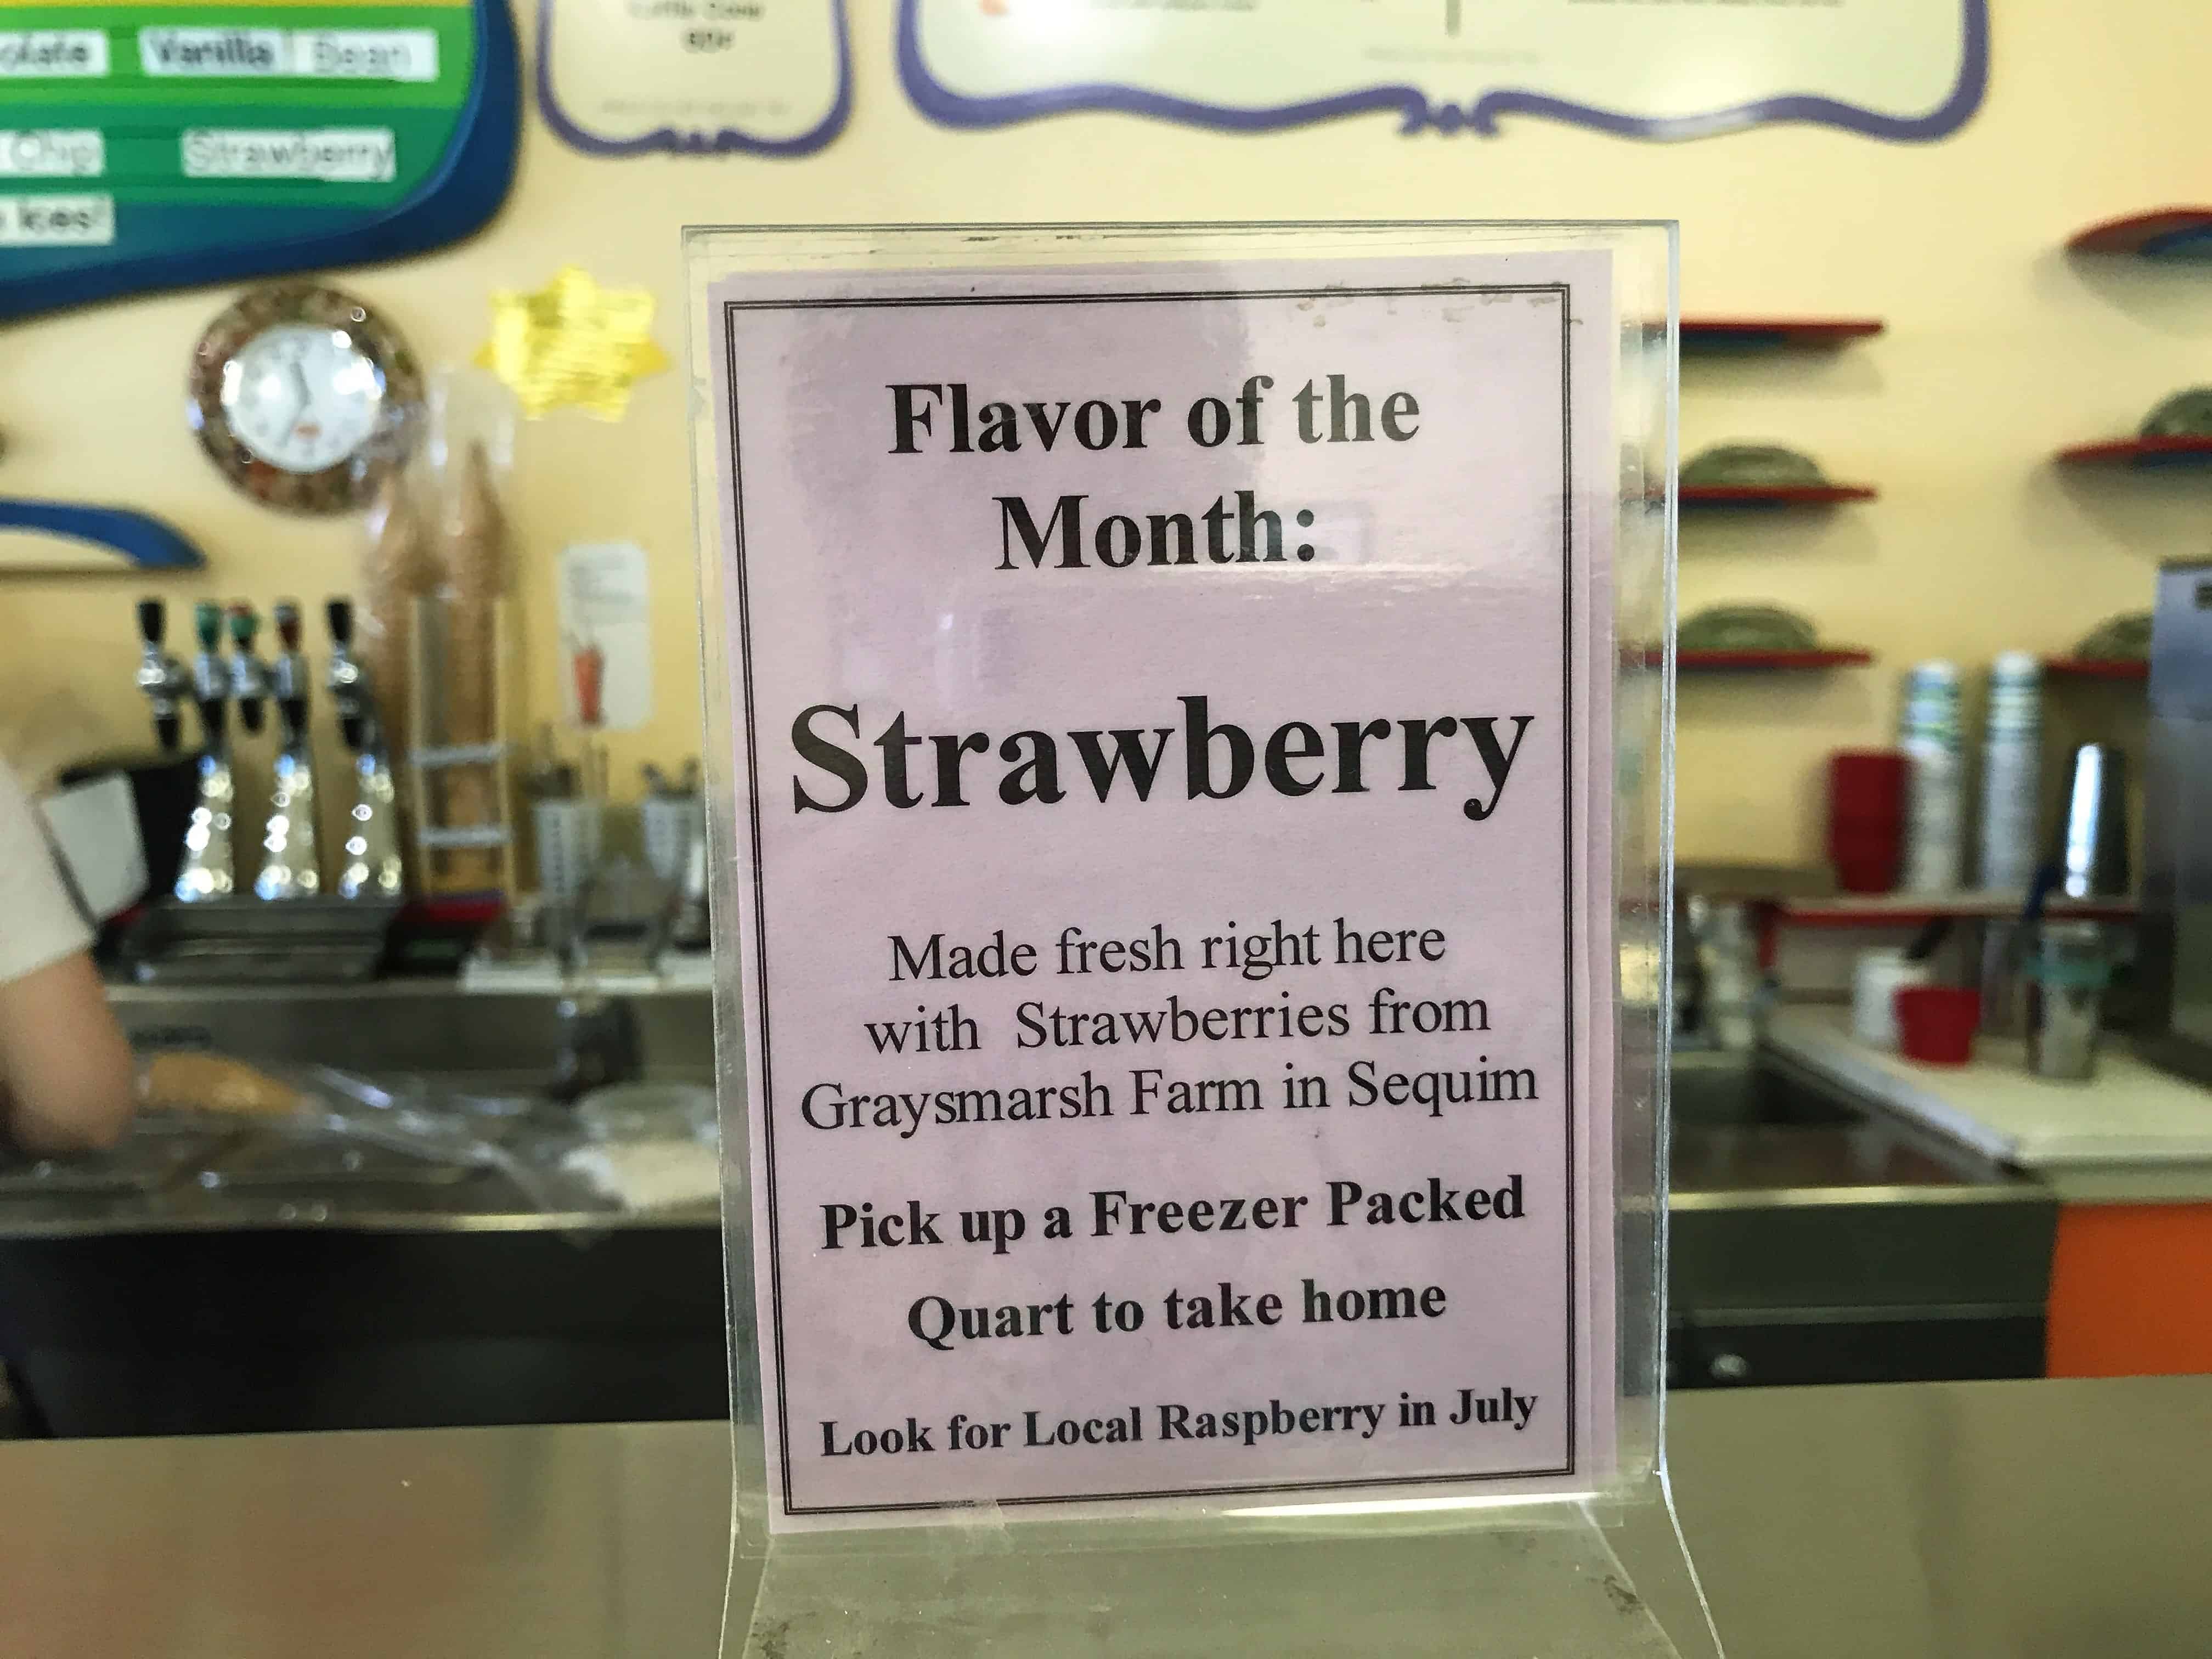 Elevated Ice Cream flavor of the month